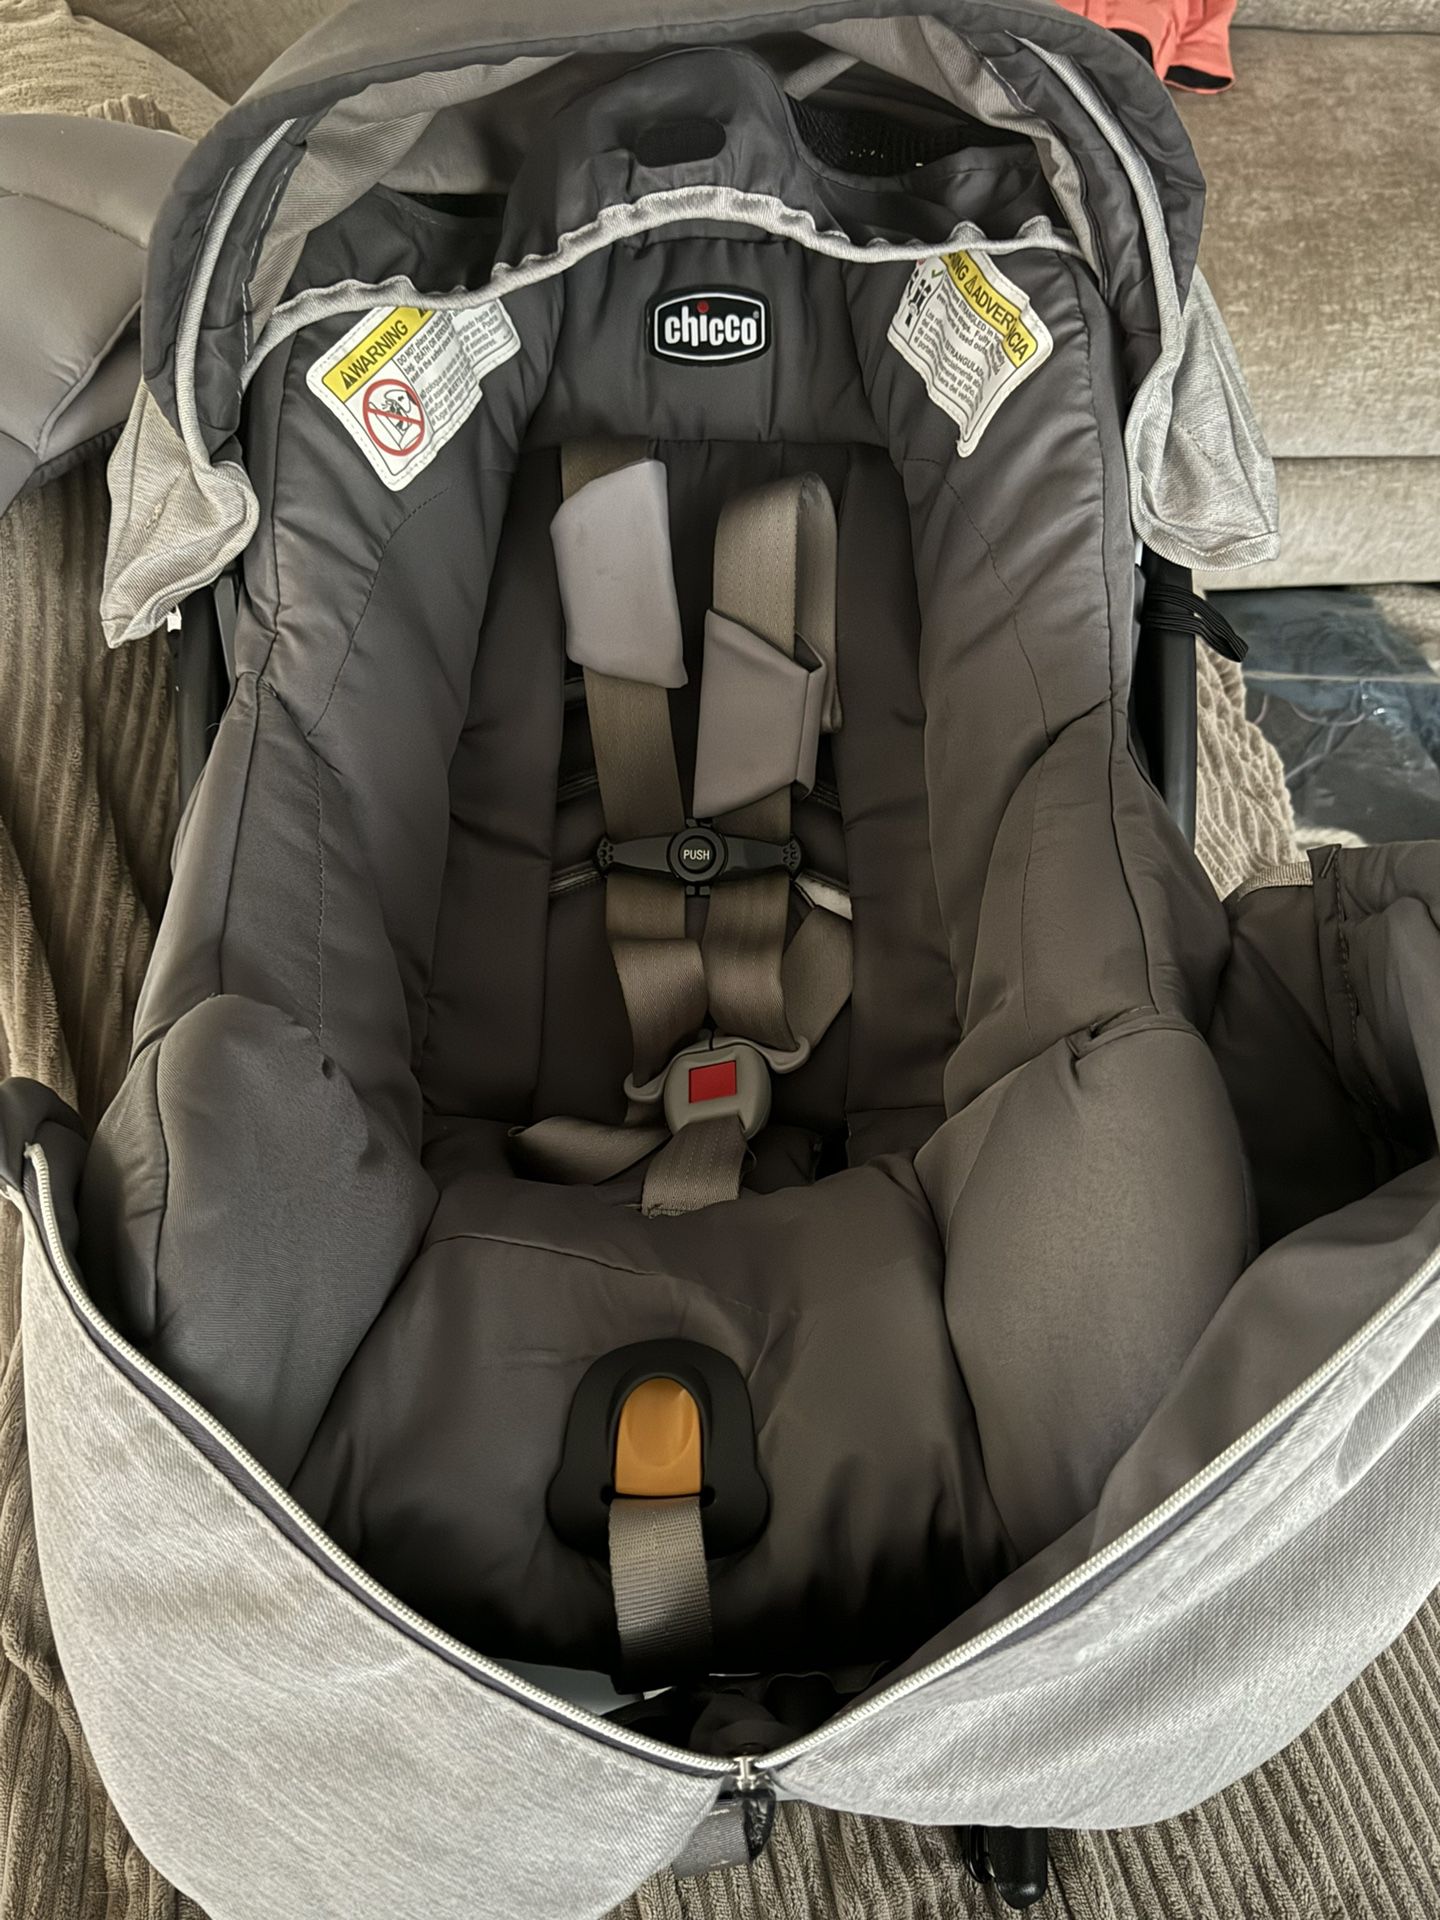 Chicco Keyfit 30 Infant Car Seat And Base W Infant Insert 